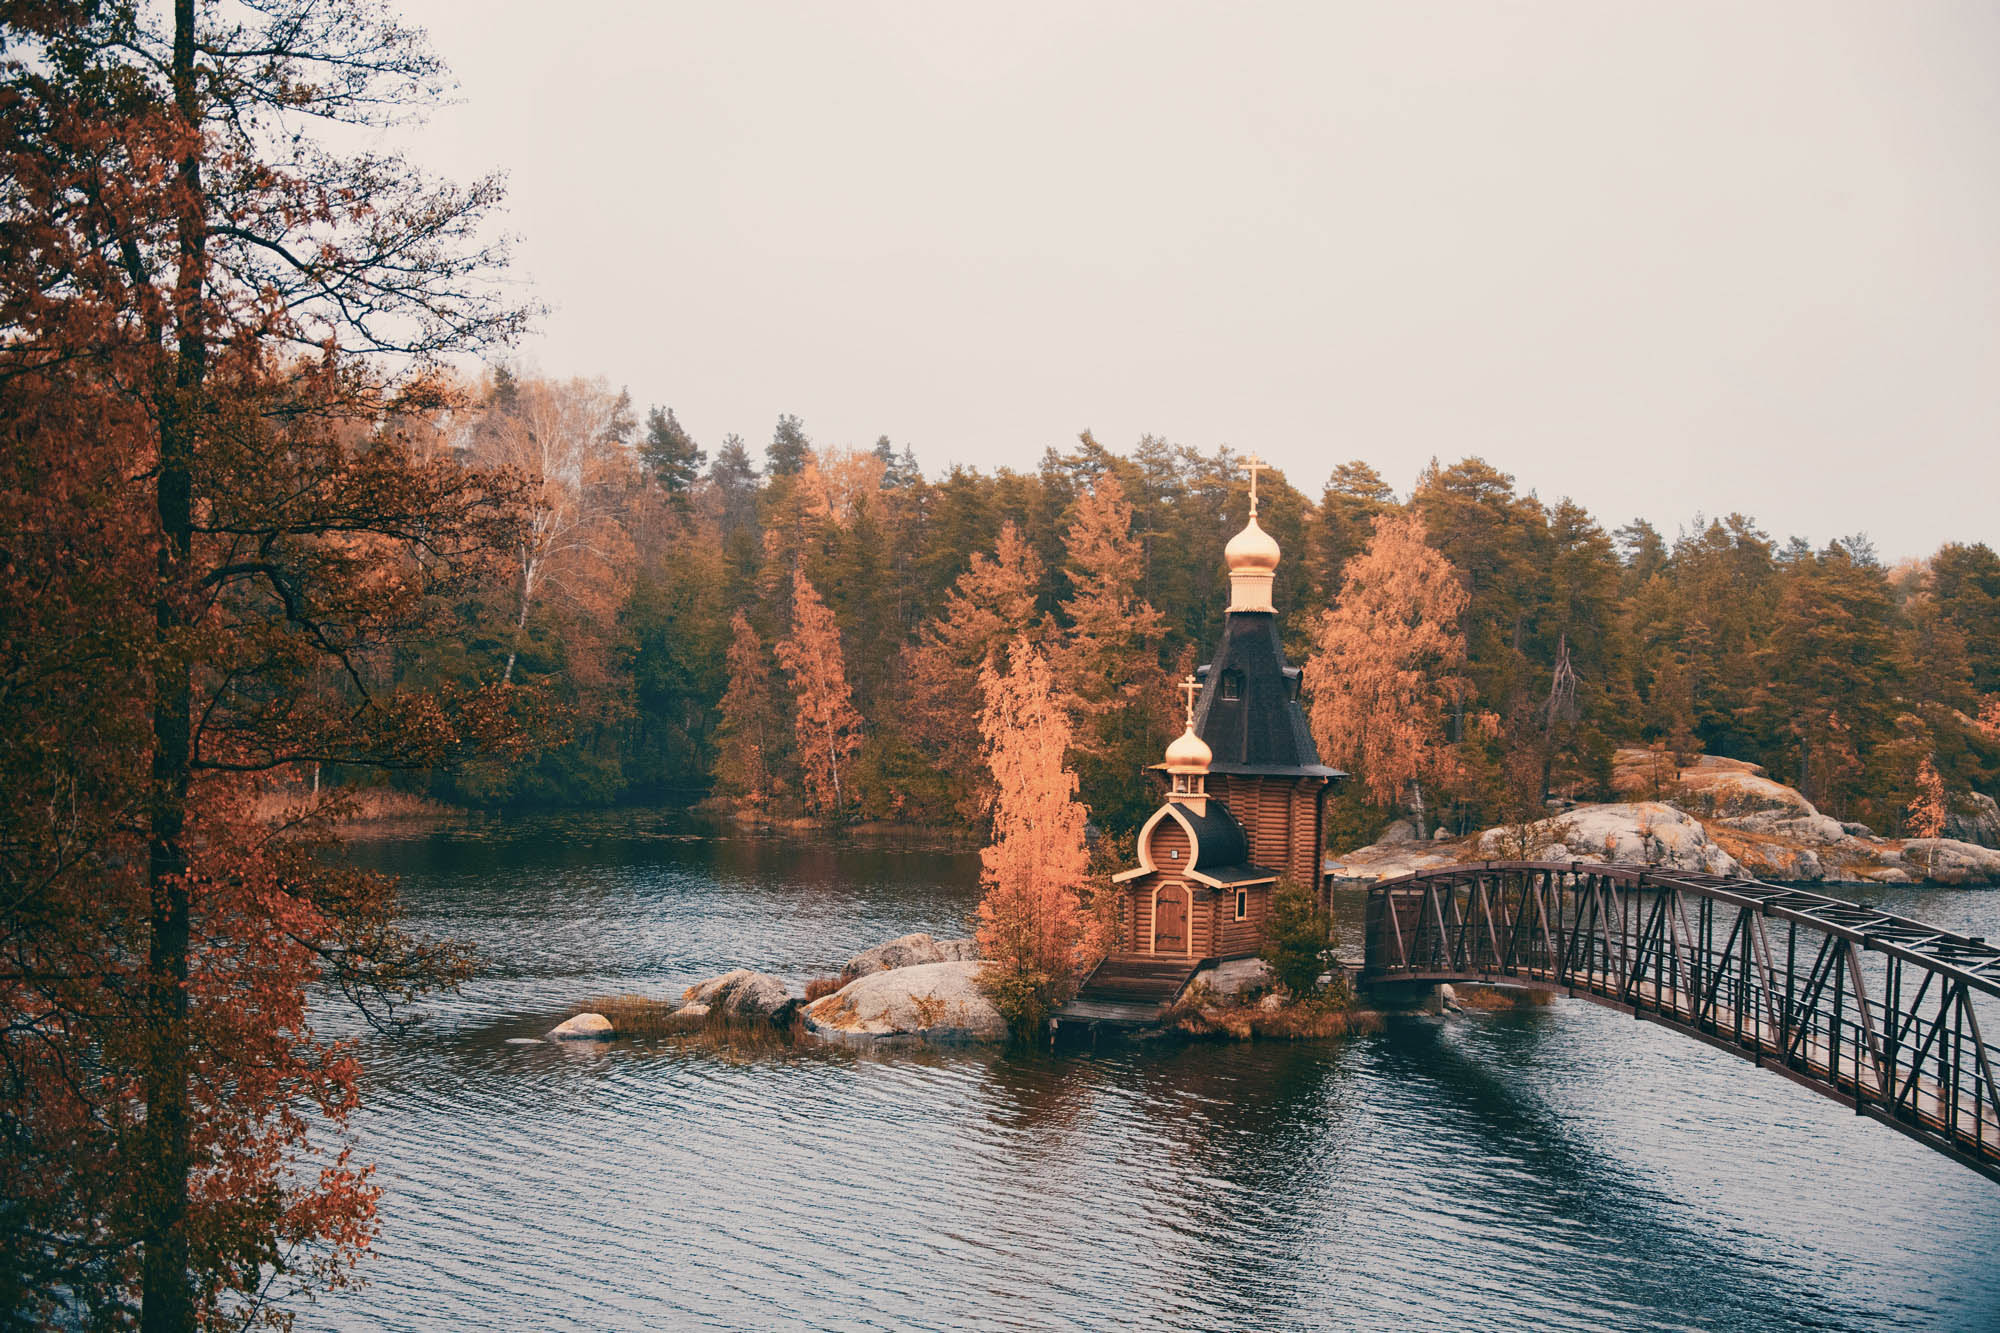 Wooden church in middle of lake, bridge leading to it